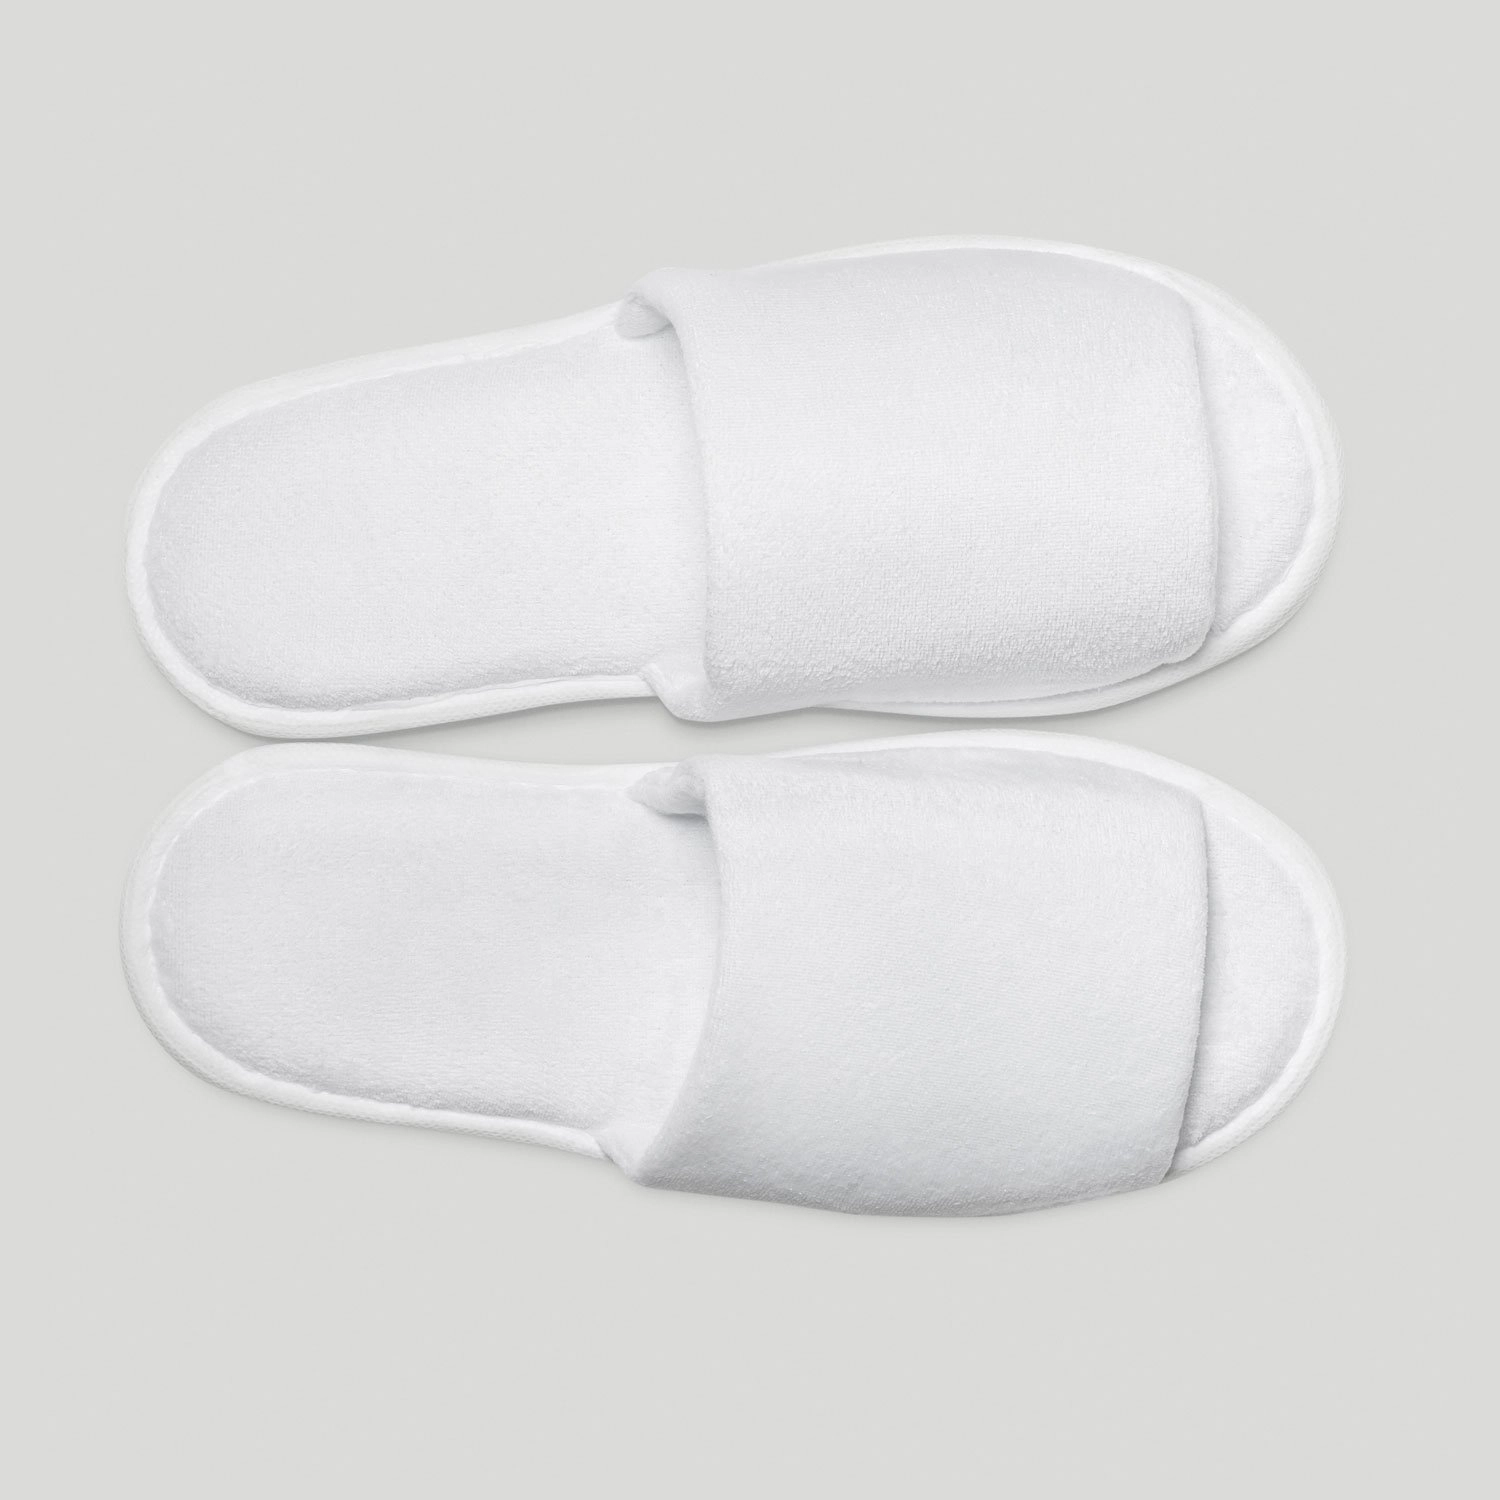 Men :: Slippers :: Terry Slippers :: White Open Toe Velour Slippers - 6 pack - Wholesale Spa robes, Kids robes, Cotton robes, Spa Slippers, Wholesale Towels